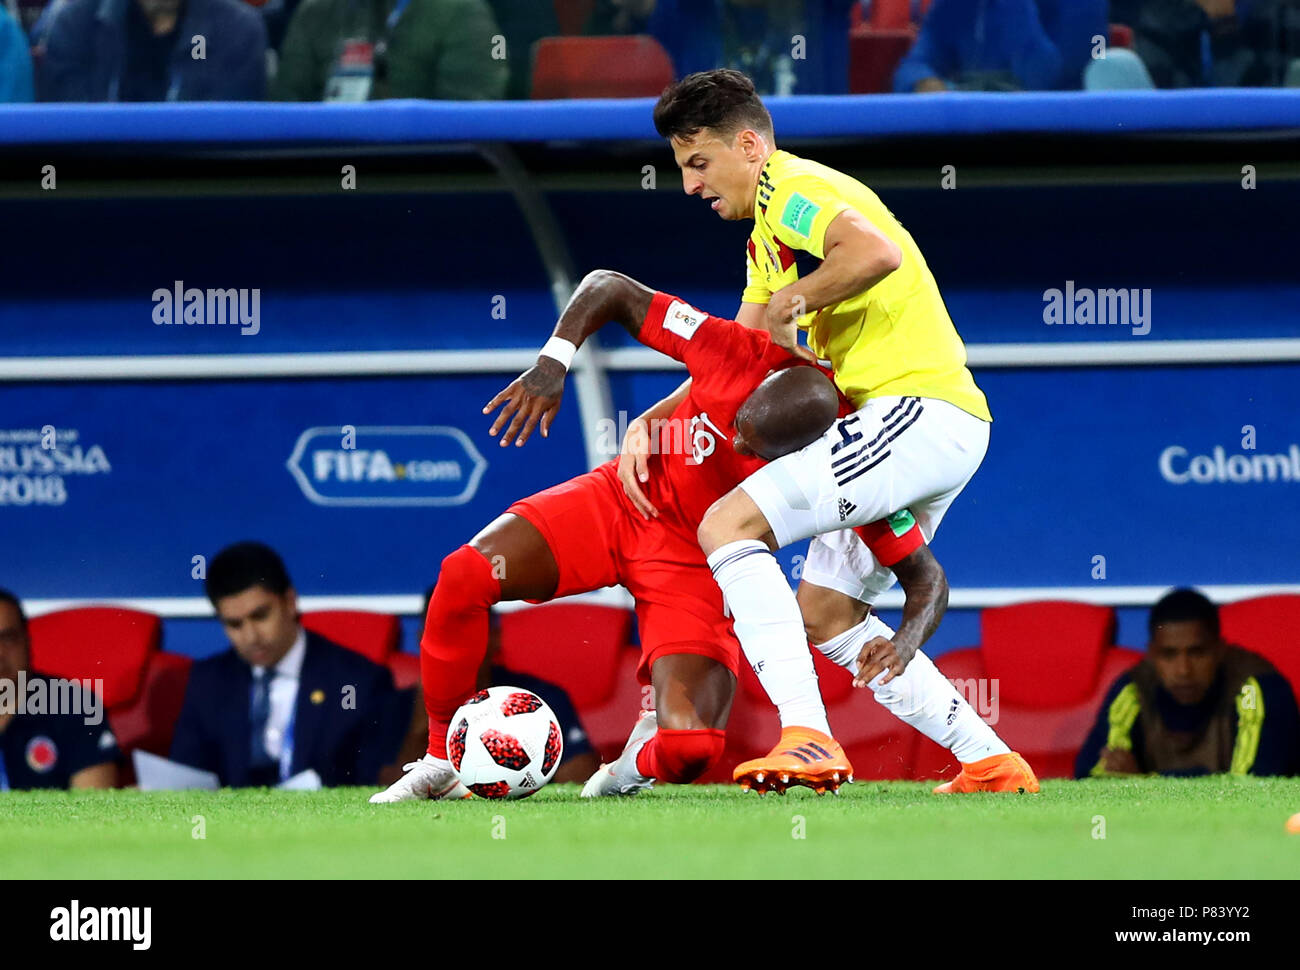 MOSCOW, RUSSIA - JULY 03:Santiago ARIAS of Colombia ,challenge with Ashley YOUNG of England during the 2018 FIFA World Cup Russia Round of 16 match between Colombia and England at Spartak Stadium  on July 3, 2018 in Moscow, Russia. (MB Media) Stock Photo